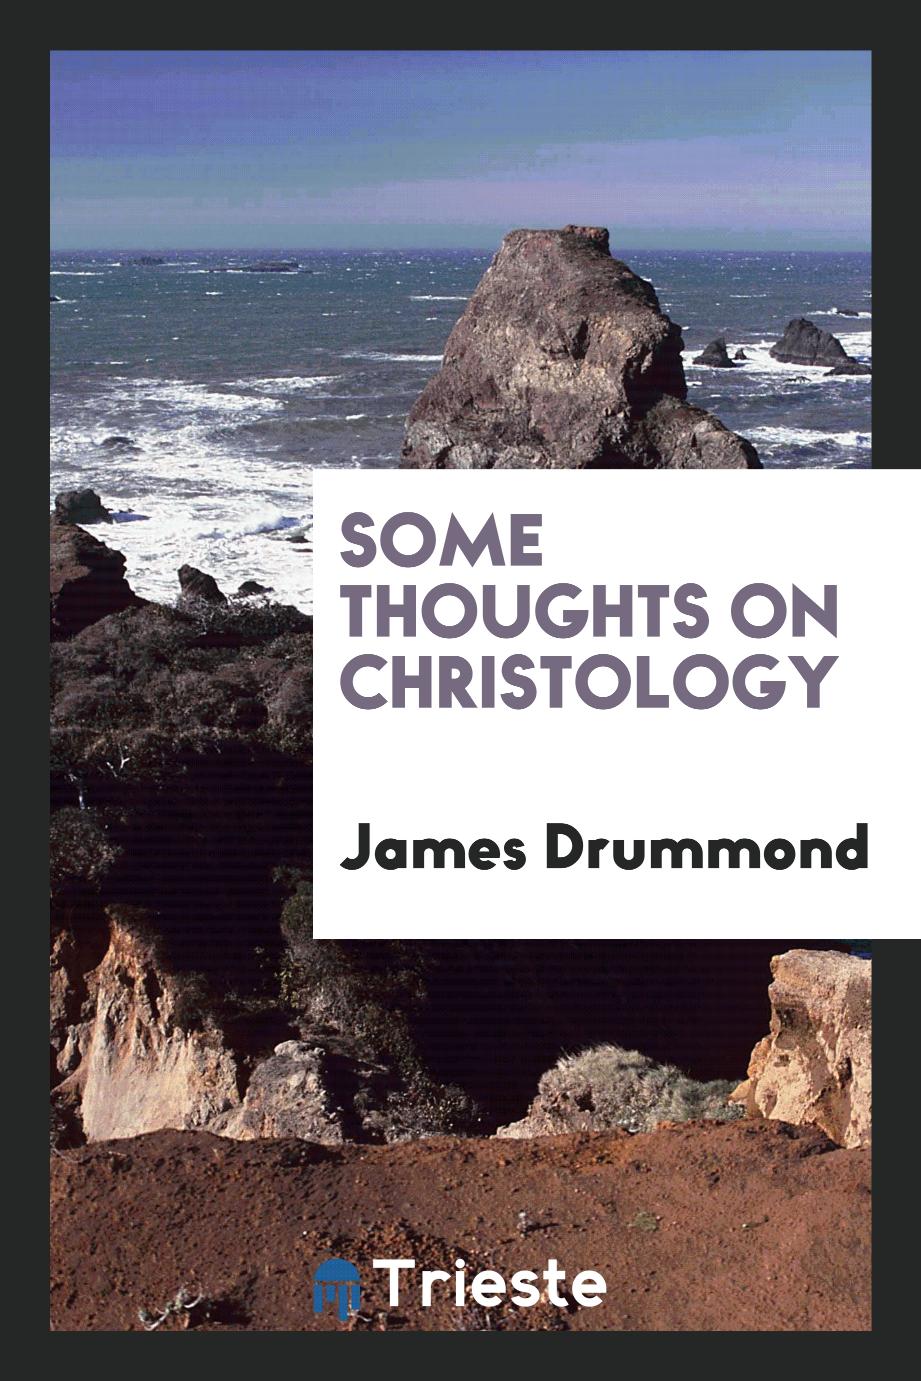 Some Thoughts on Christology